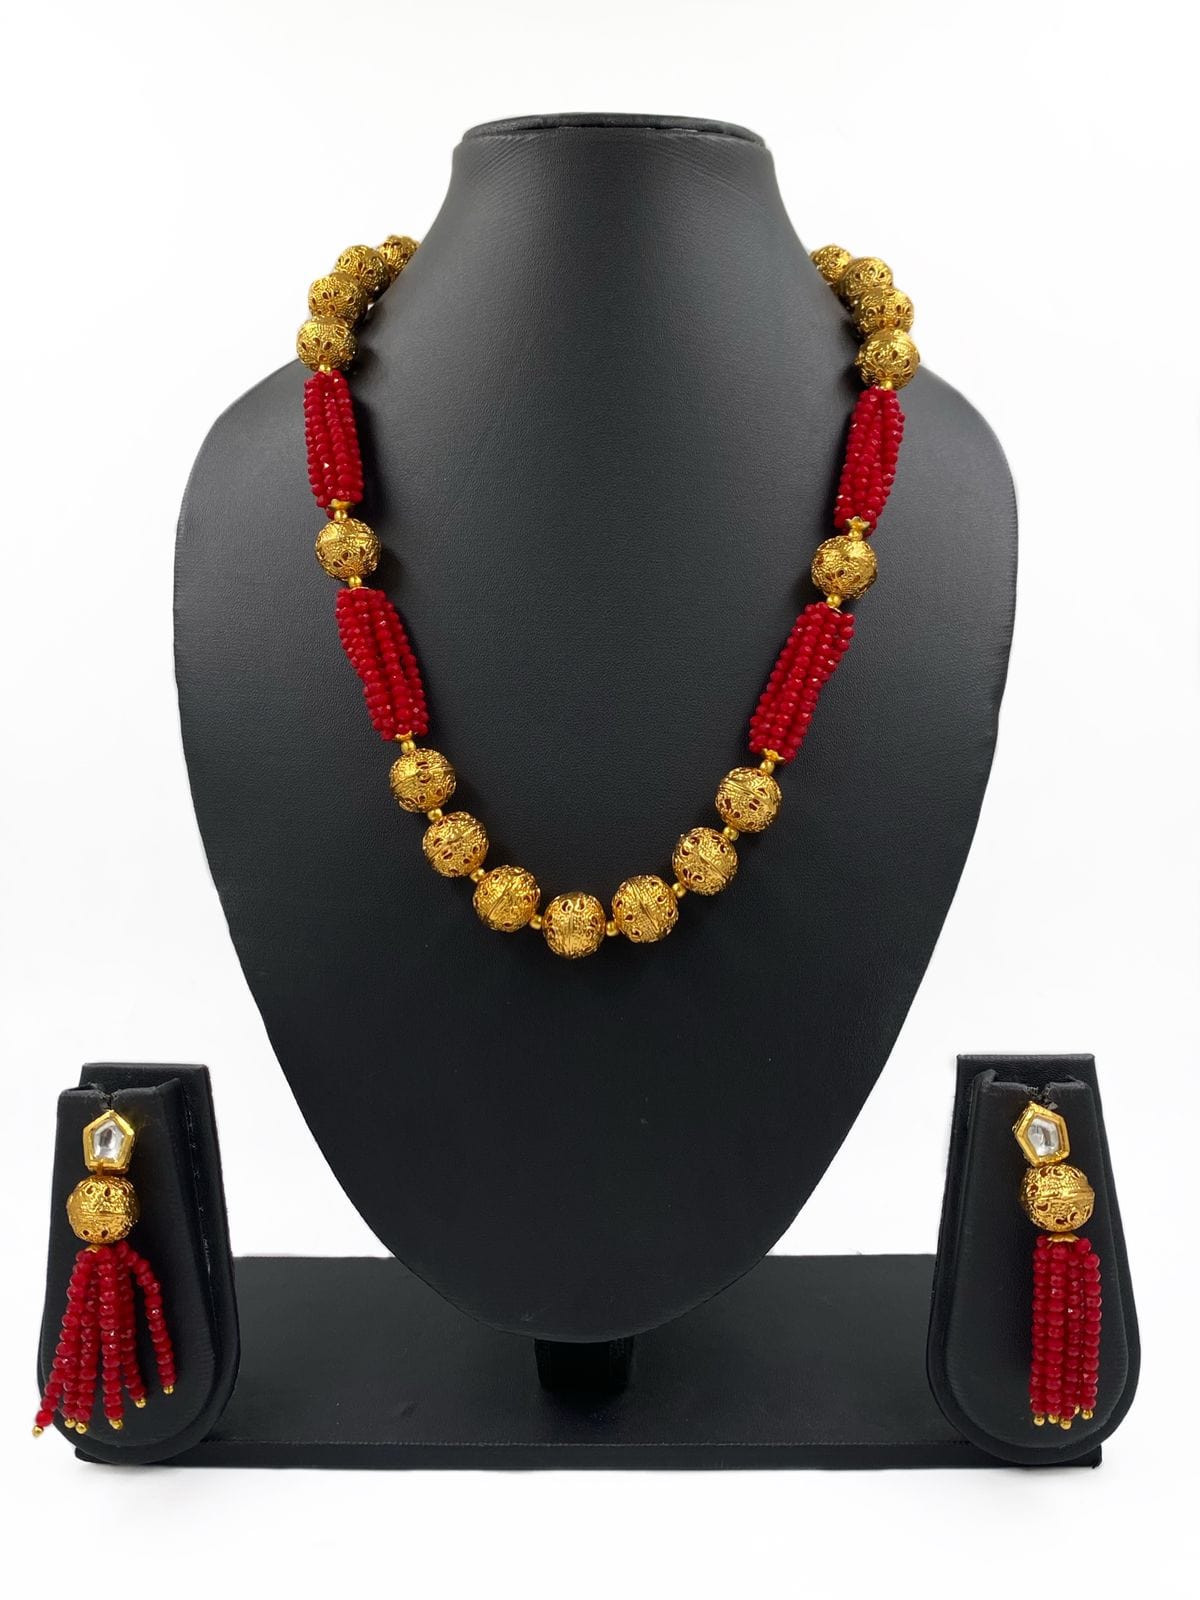 Designer Handcrafted Red Crystal And Golden Beads Necklace For Woman By Gehna Shop Beads Jewellery